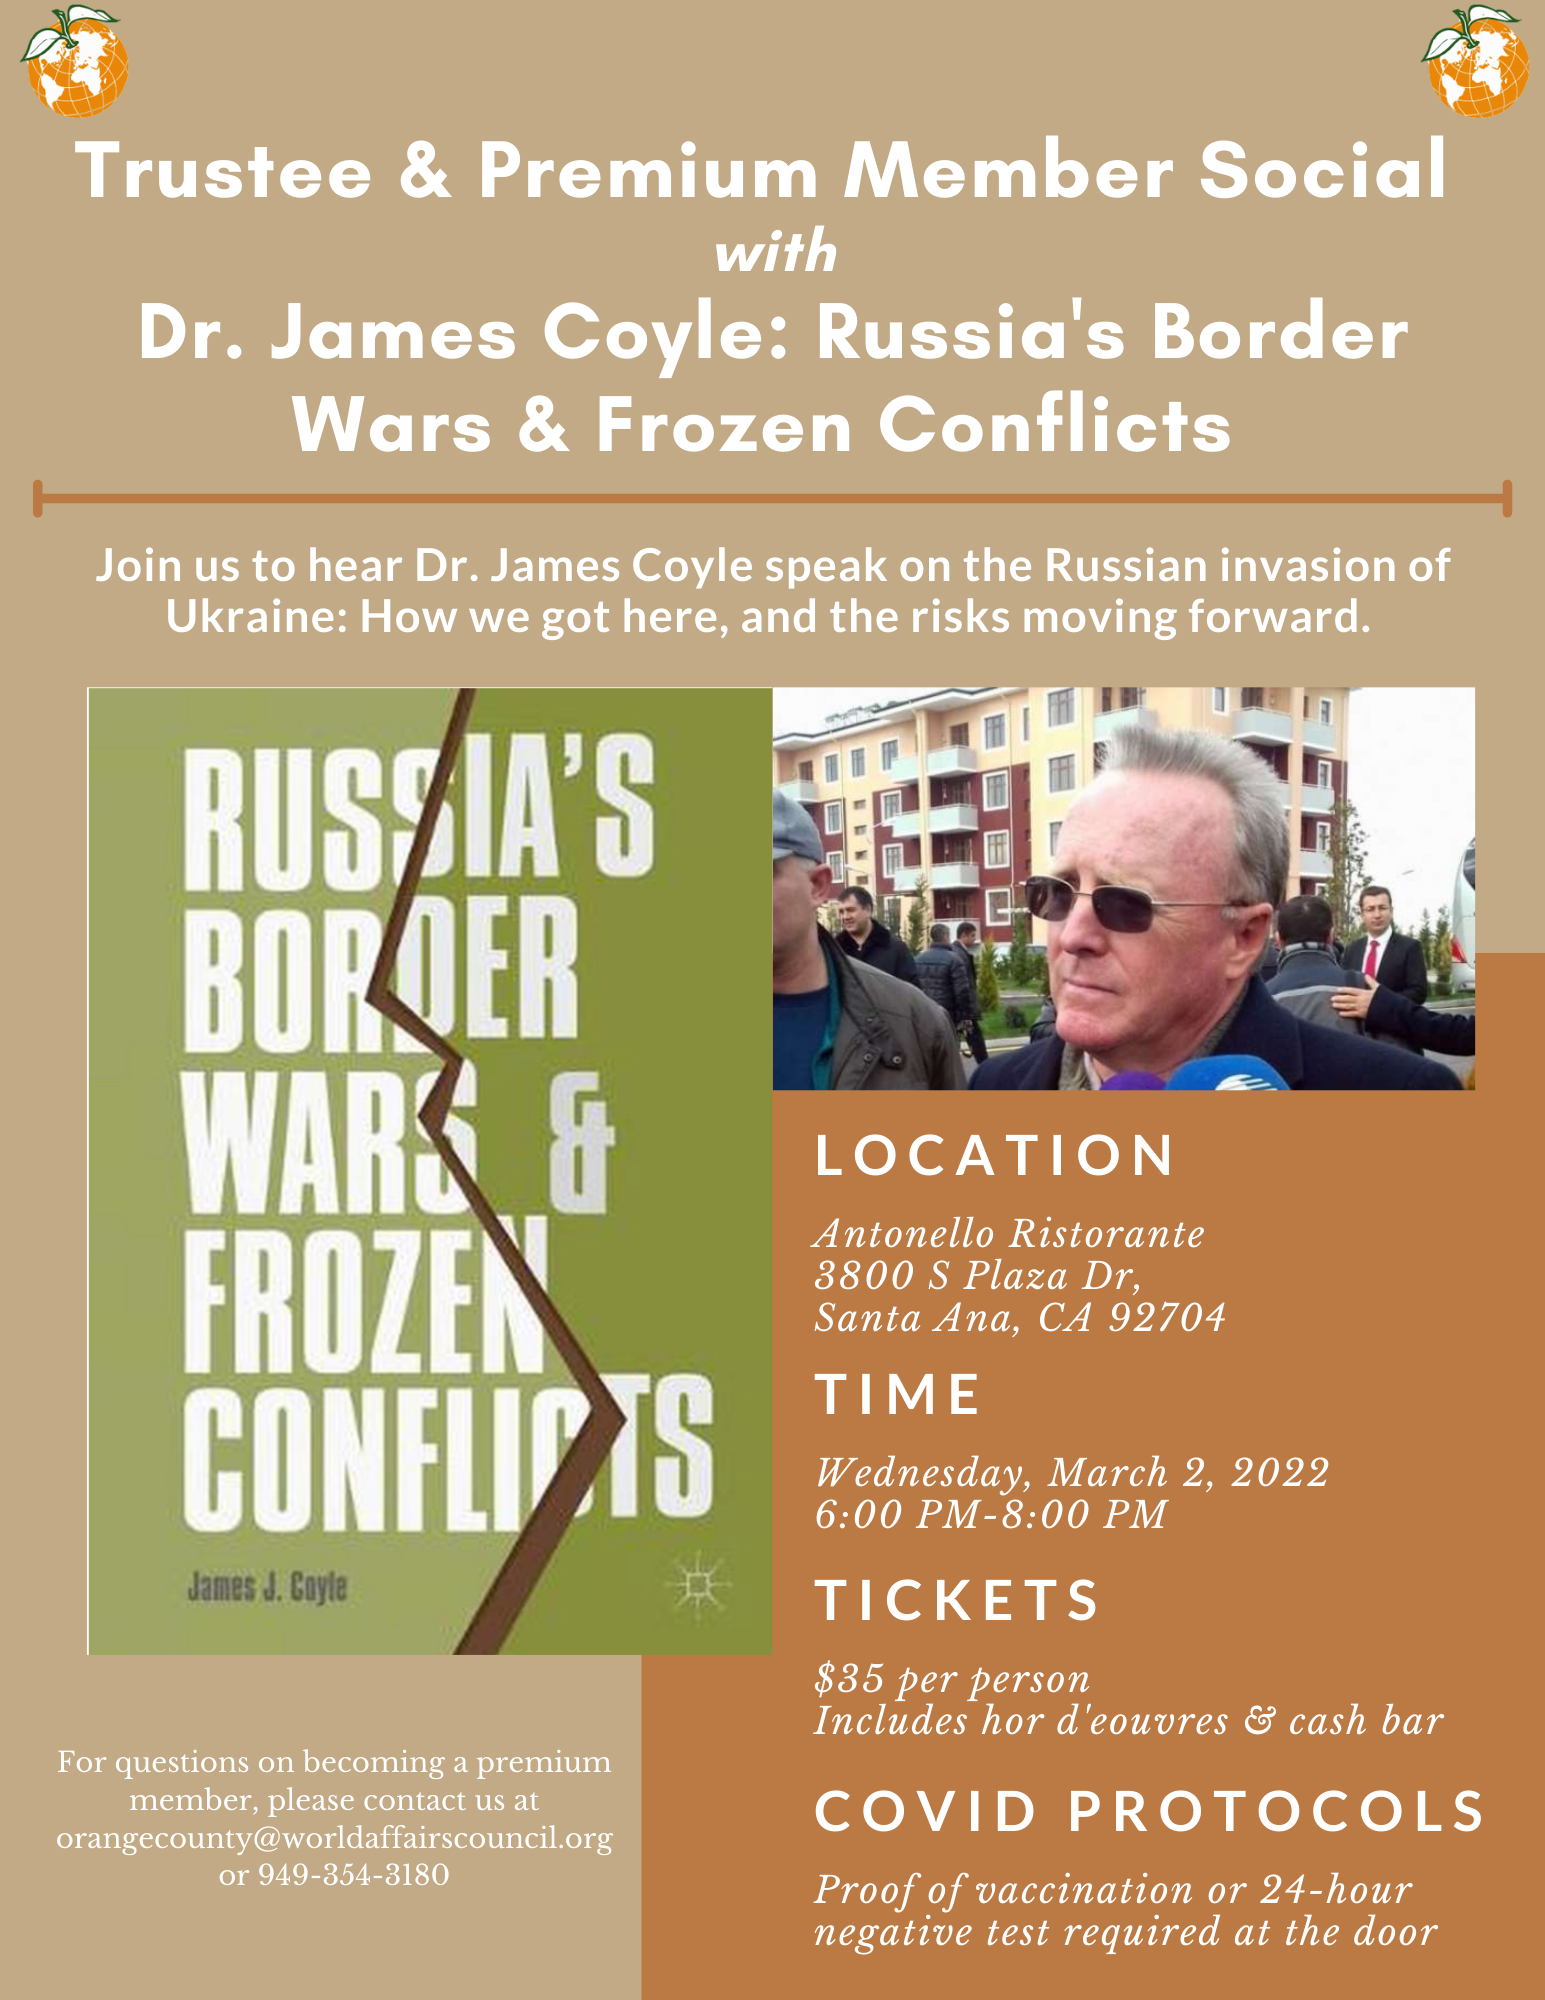 Trustee & Premium Member Social with Dr. James Coyle on the Russian Invasion of Ukraine: How We Got Here, and the Risks Moving Forward